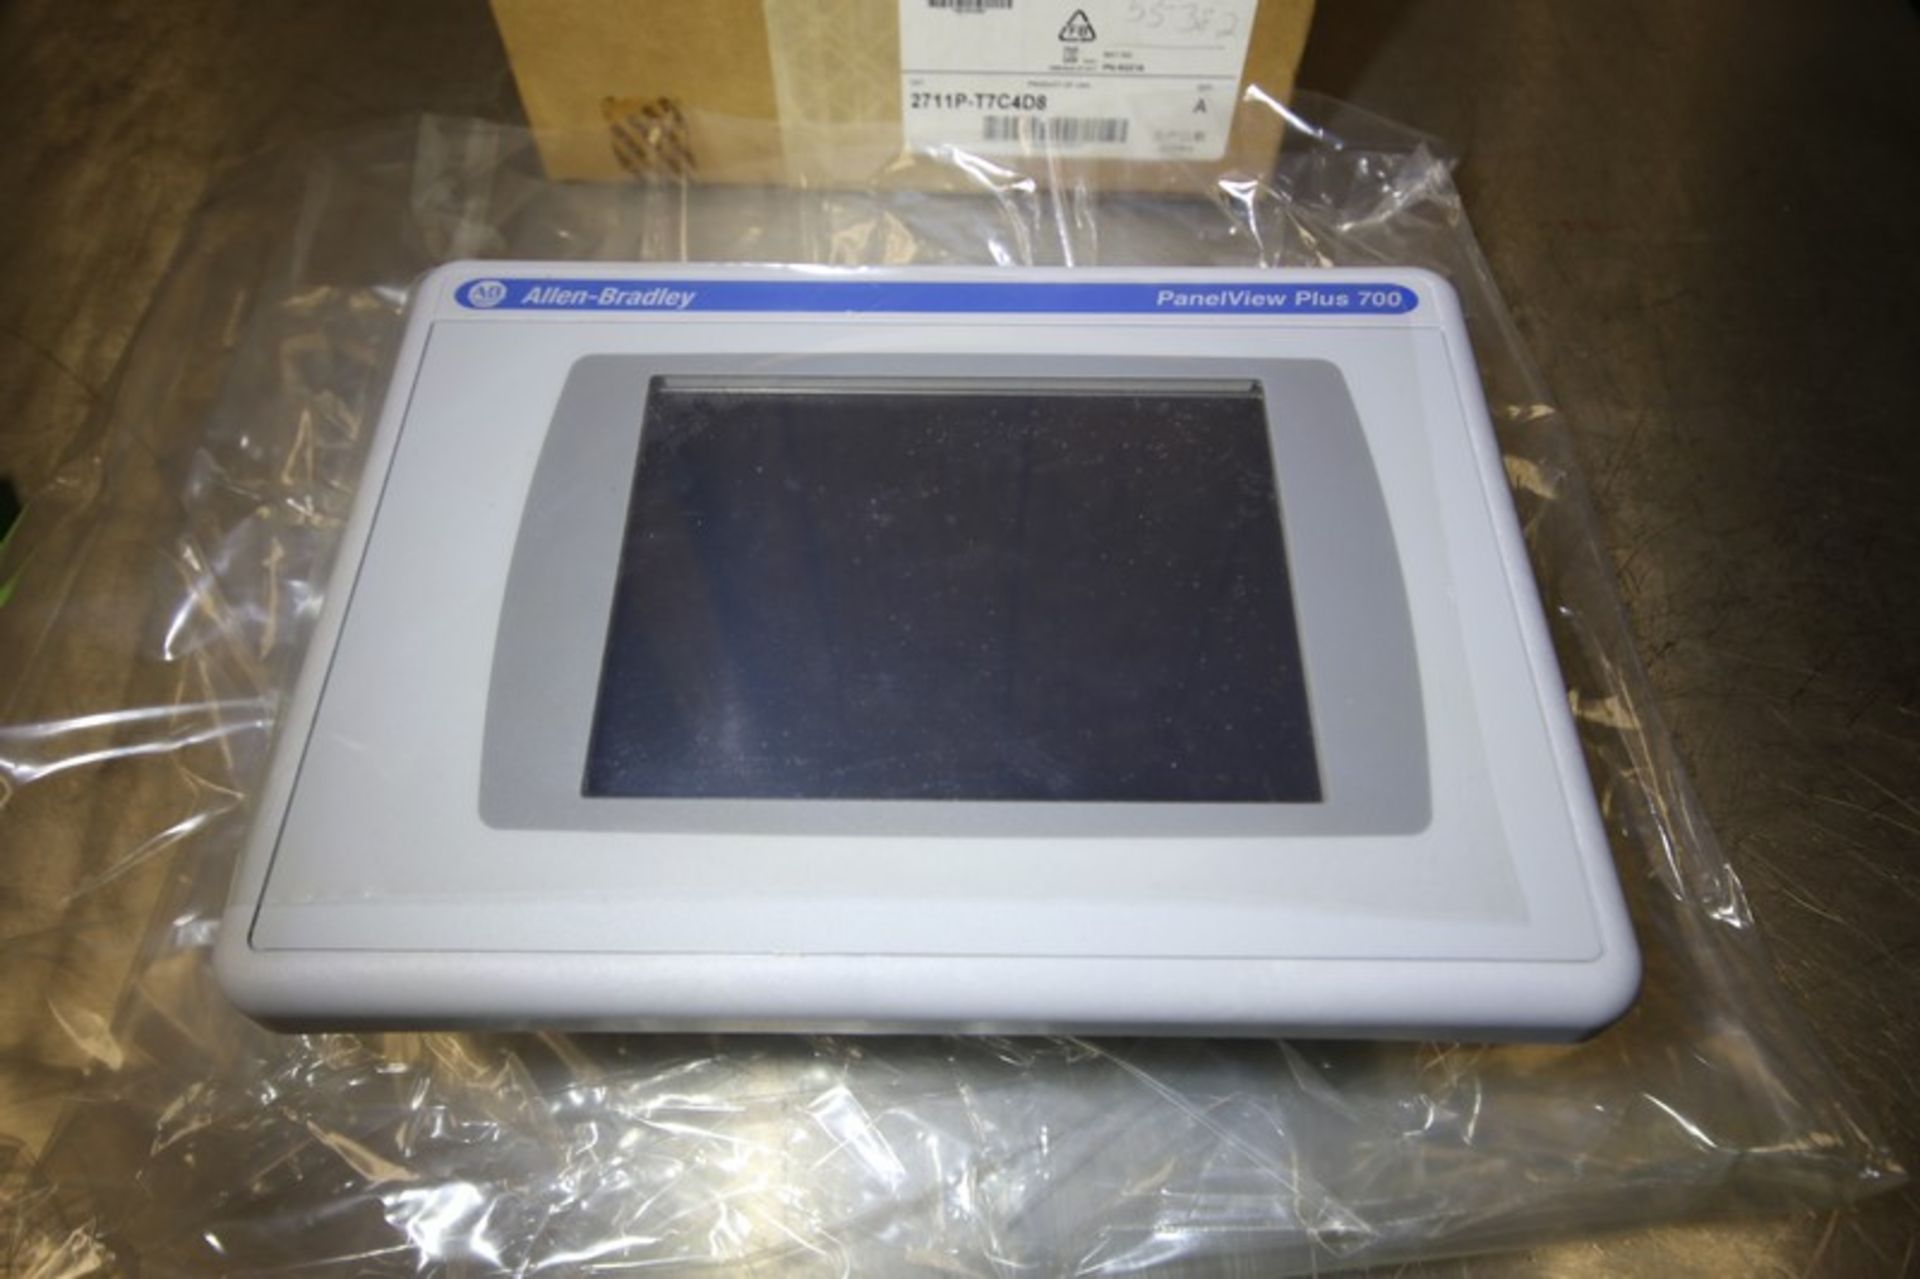 New Allen Bradley 6.5" Panelview Plus 700 Display, Cat. No. 2711P-T7C4D8 Series A (INV#88424)( - Image 2 of 3